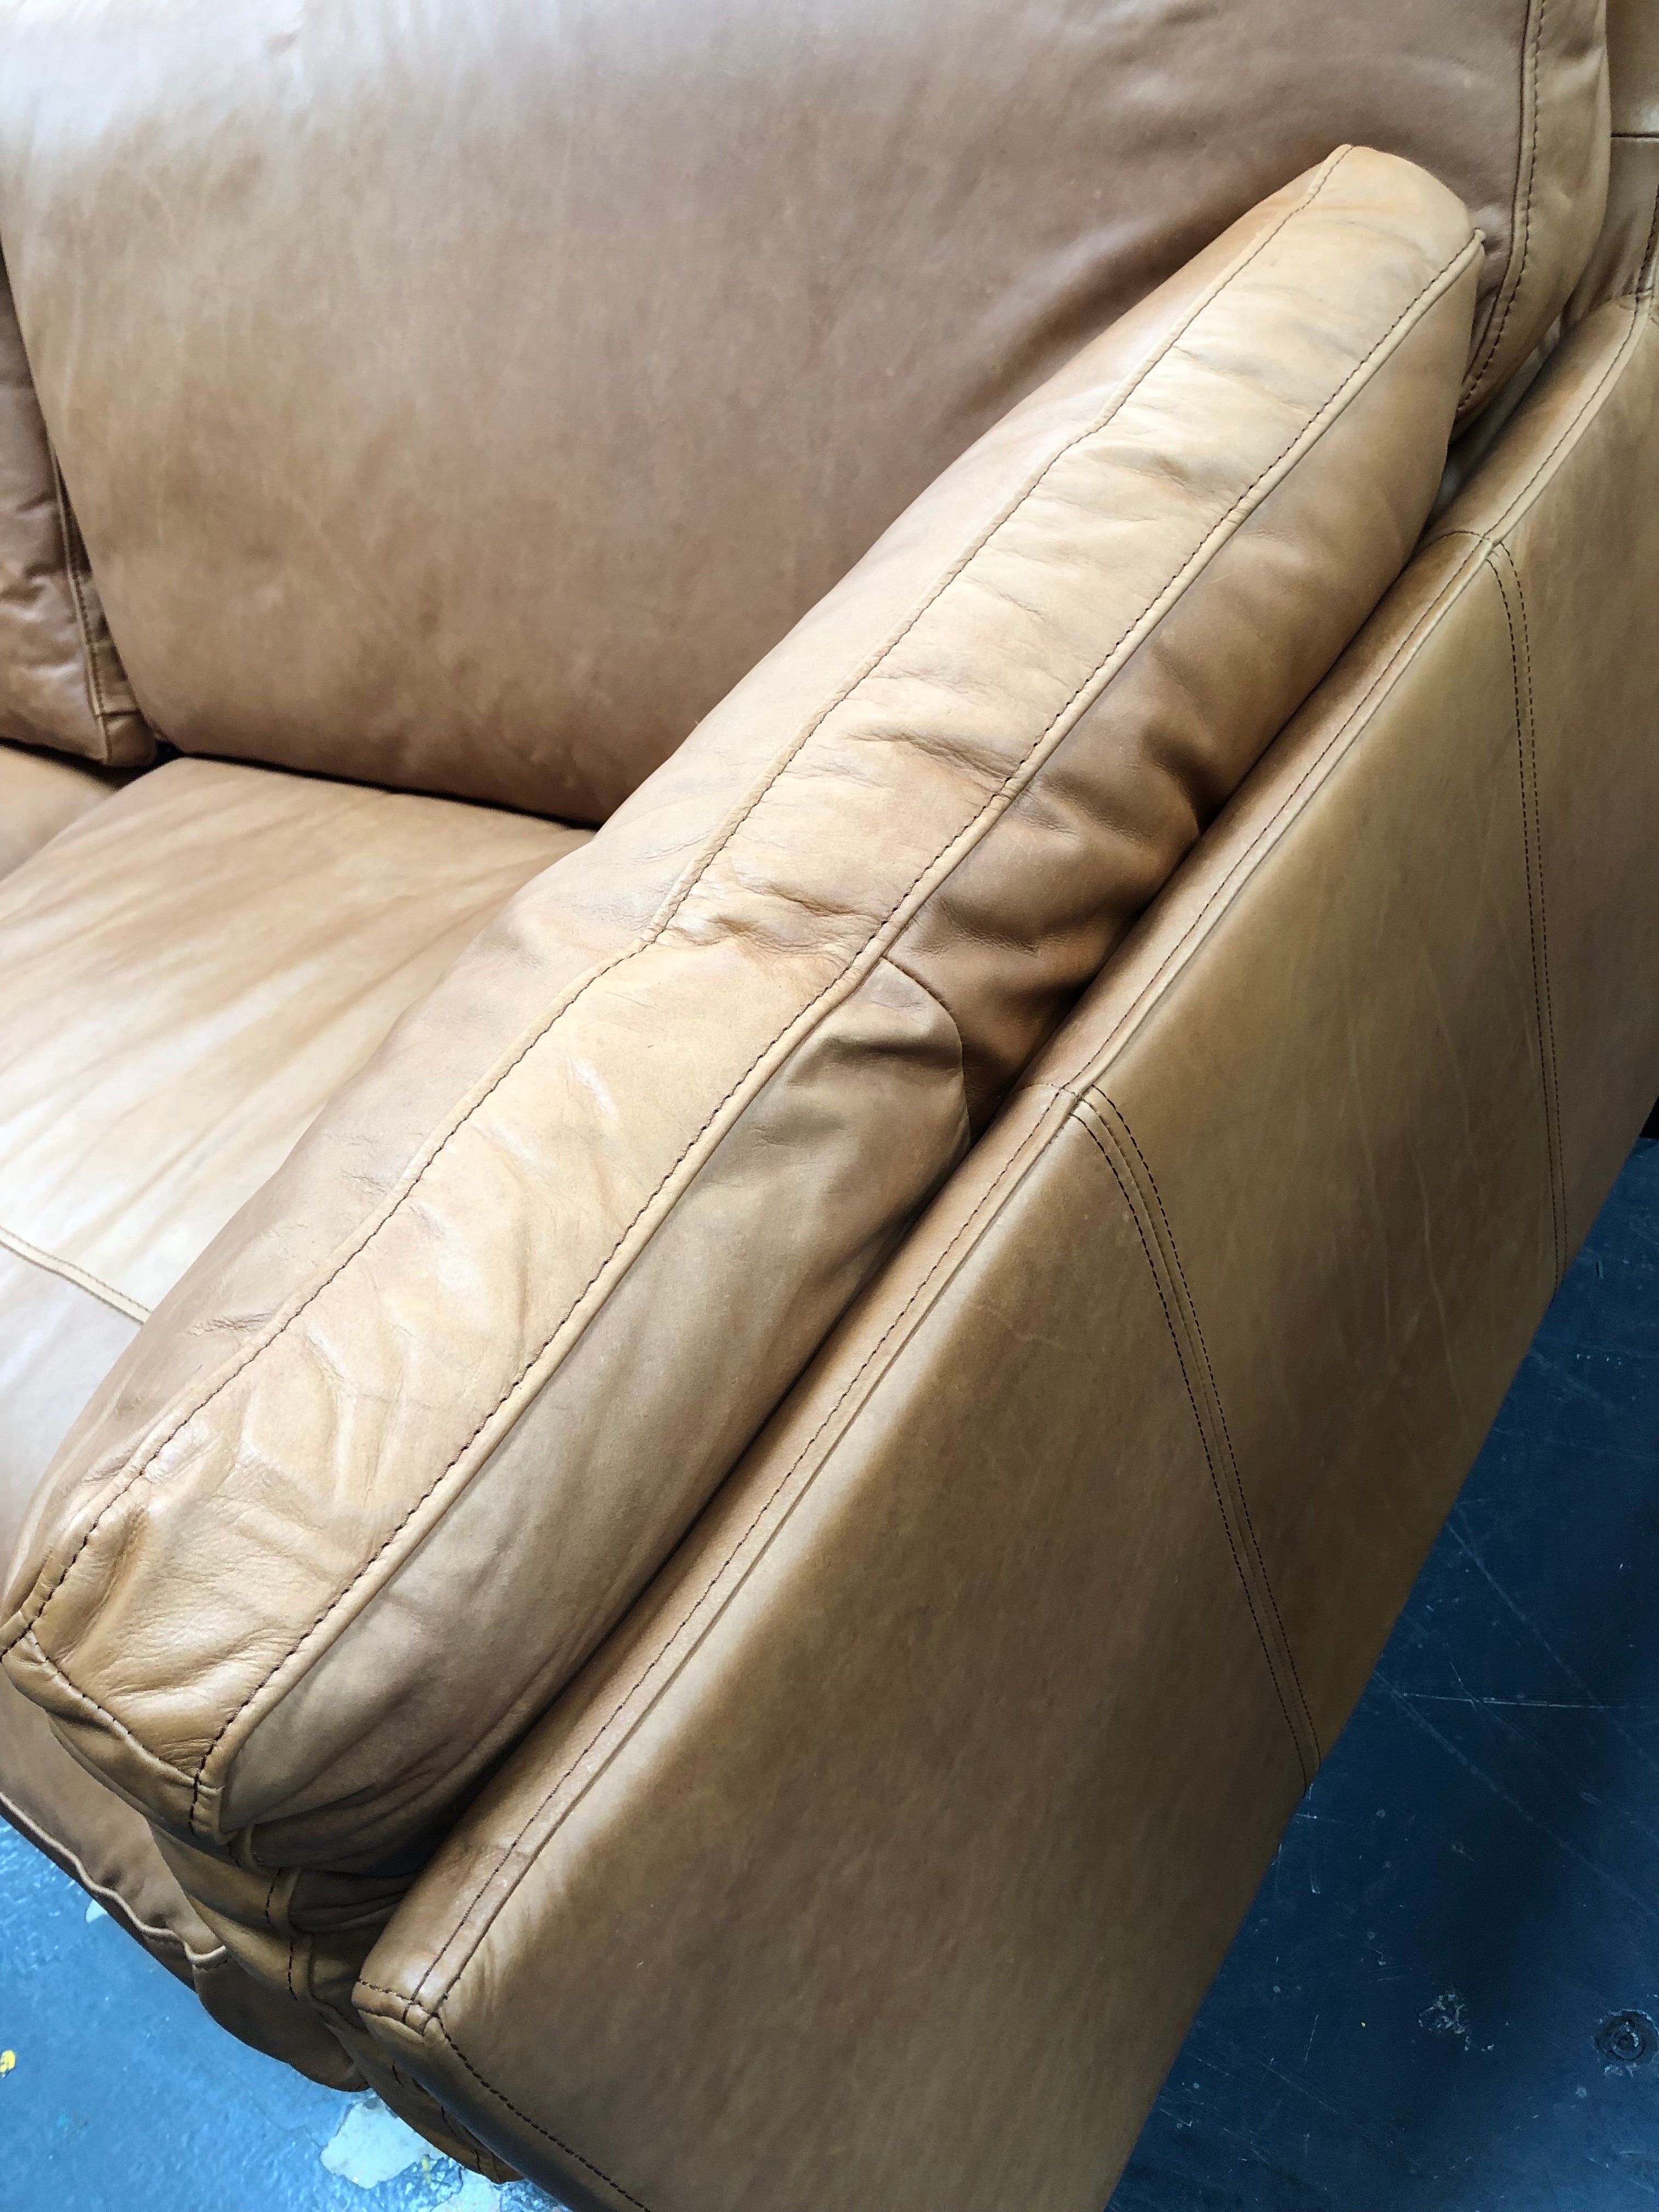 Halo Gable sofa from Top Secret Furniture